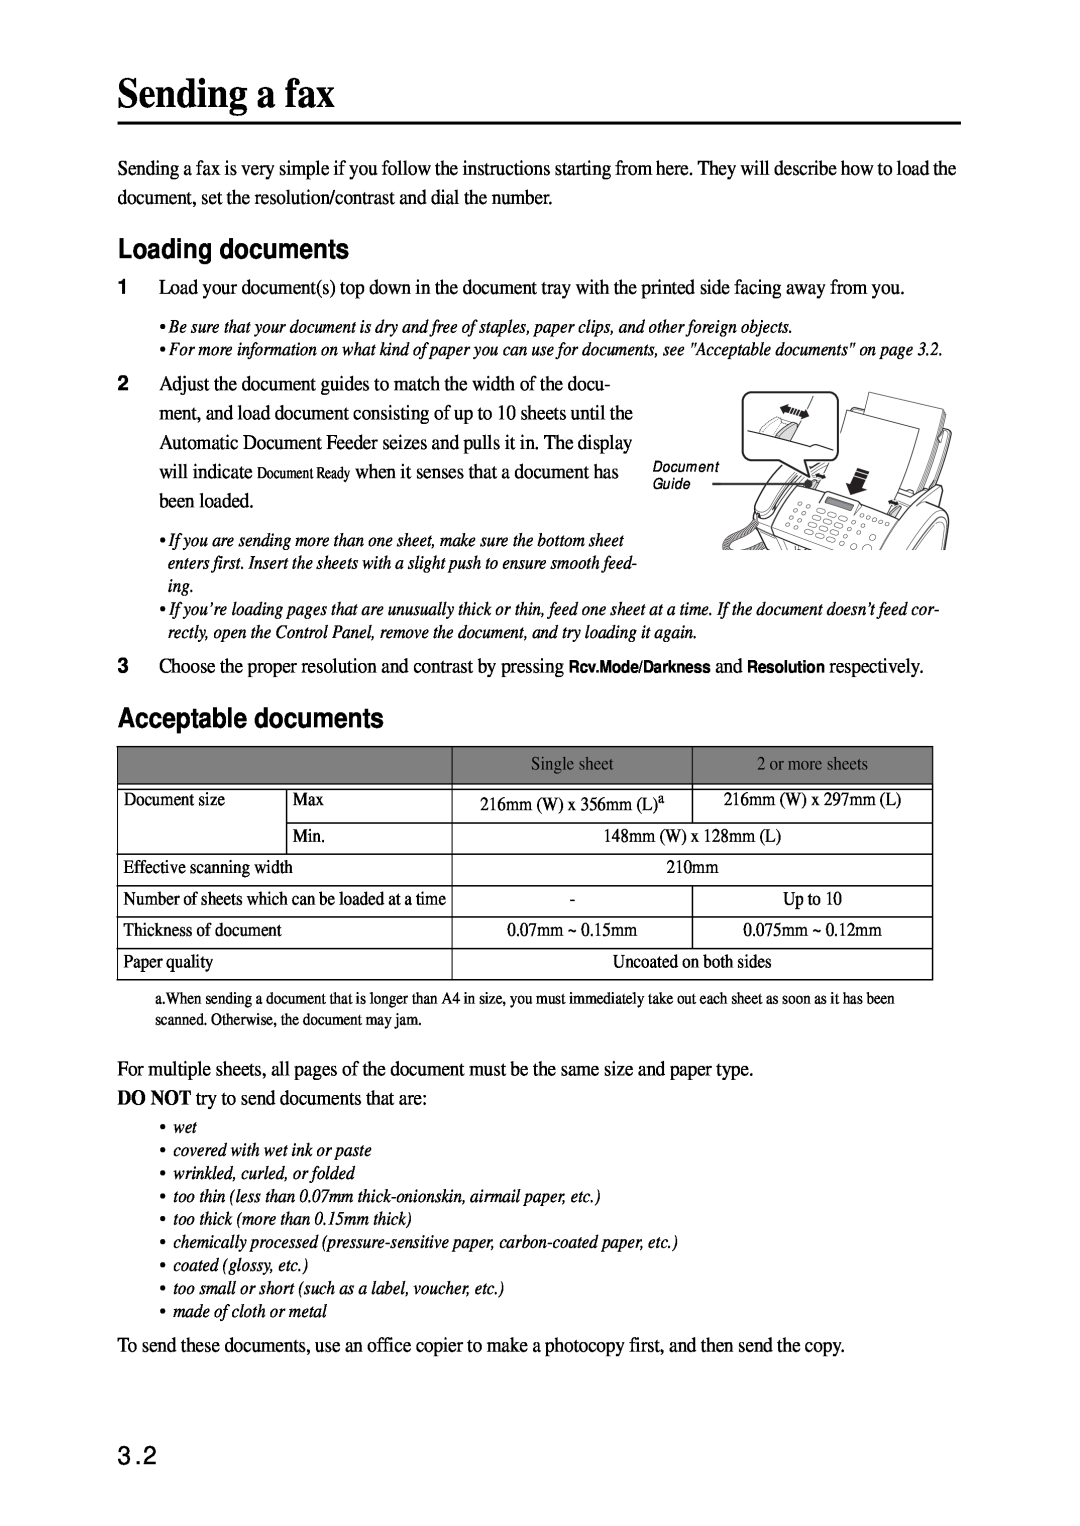 Samsung SF-340 Series manual Sending a fax, Loading documents, Acceptable documents 